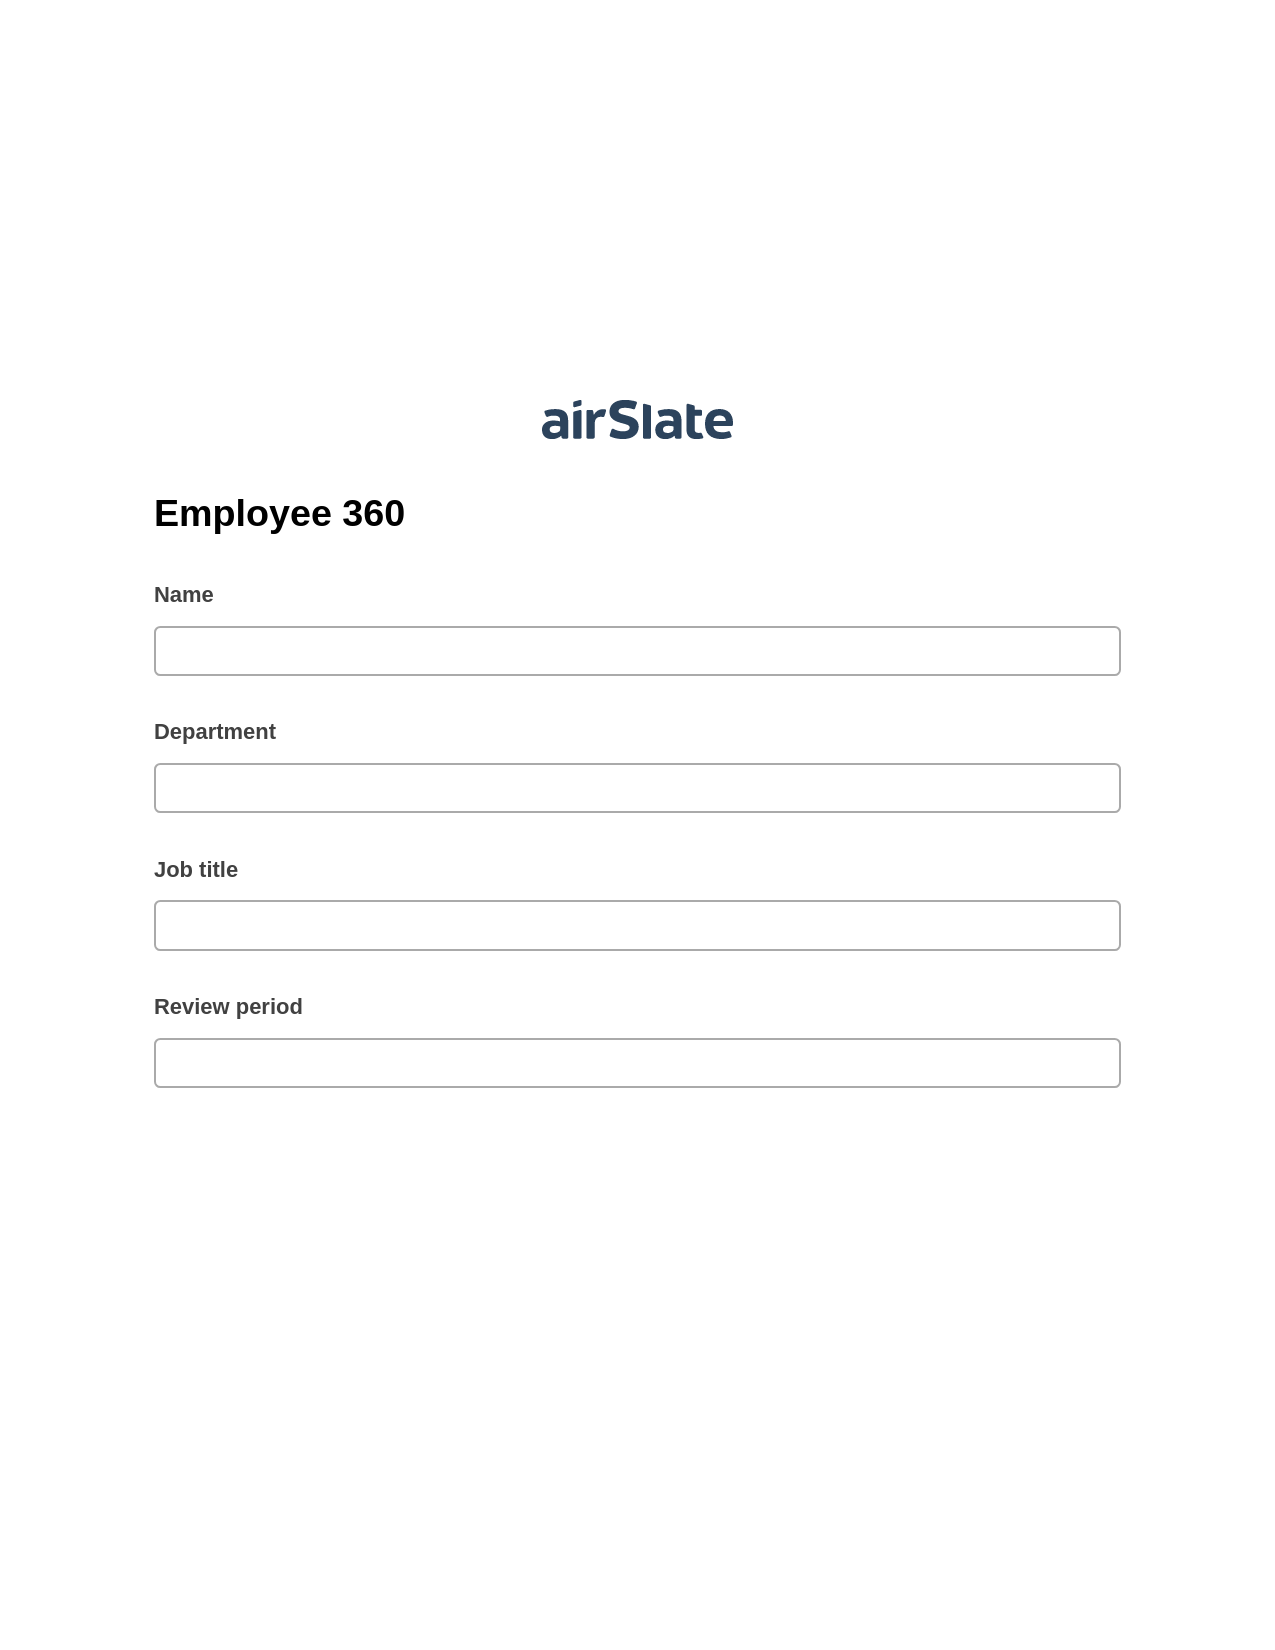 Employee 360 Pre-fill from MS Dynamics 365 Records, Google Cloud Print Bot, Post-finish Document Bot